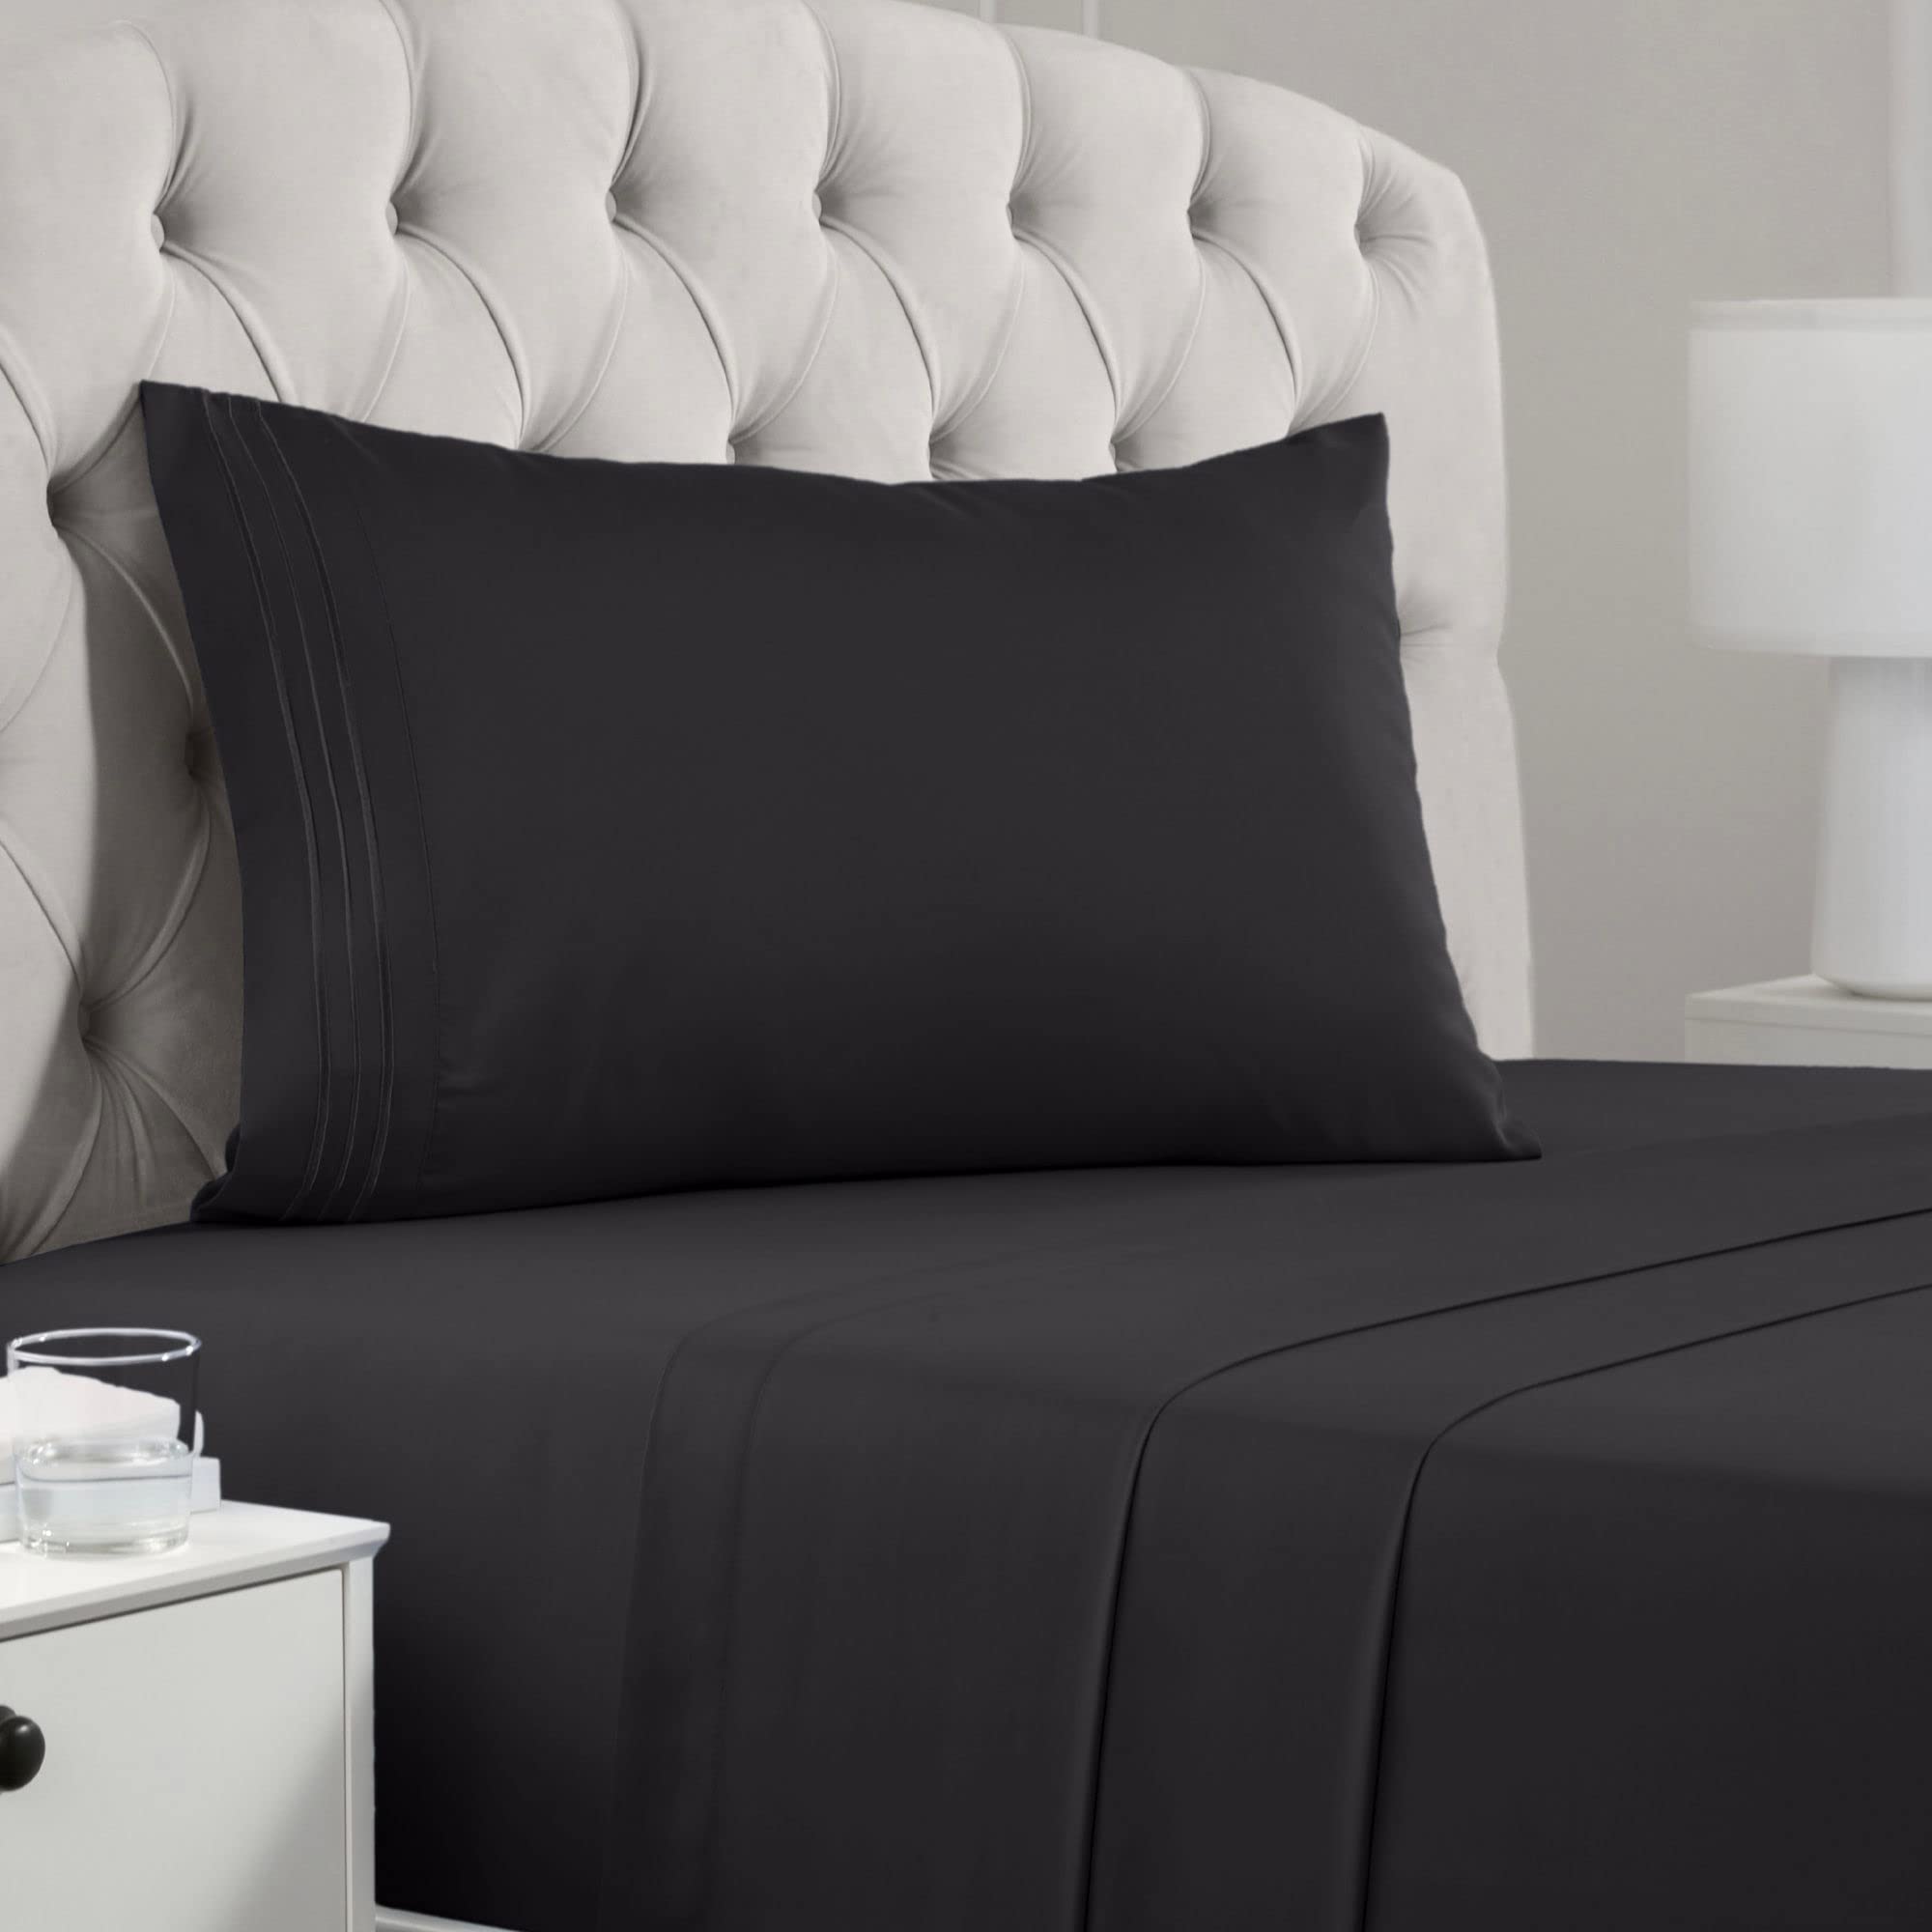 Book Cover Mellanni Twin Sheet Set - Iconic Collection Bedding Sheets & Pillowcases - Hotel Luxury, Extra Soft, Cooling Bed Sheets - Deep Pocket up to 16